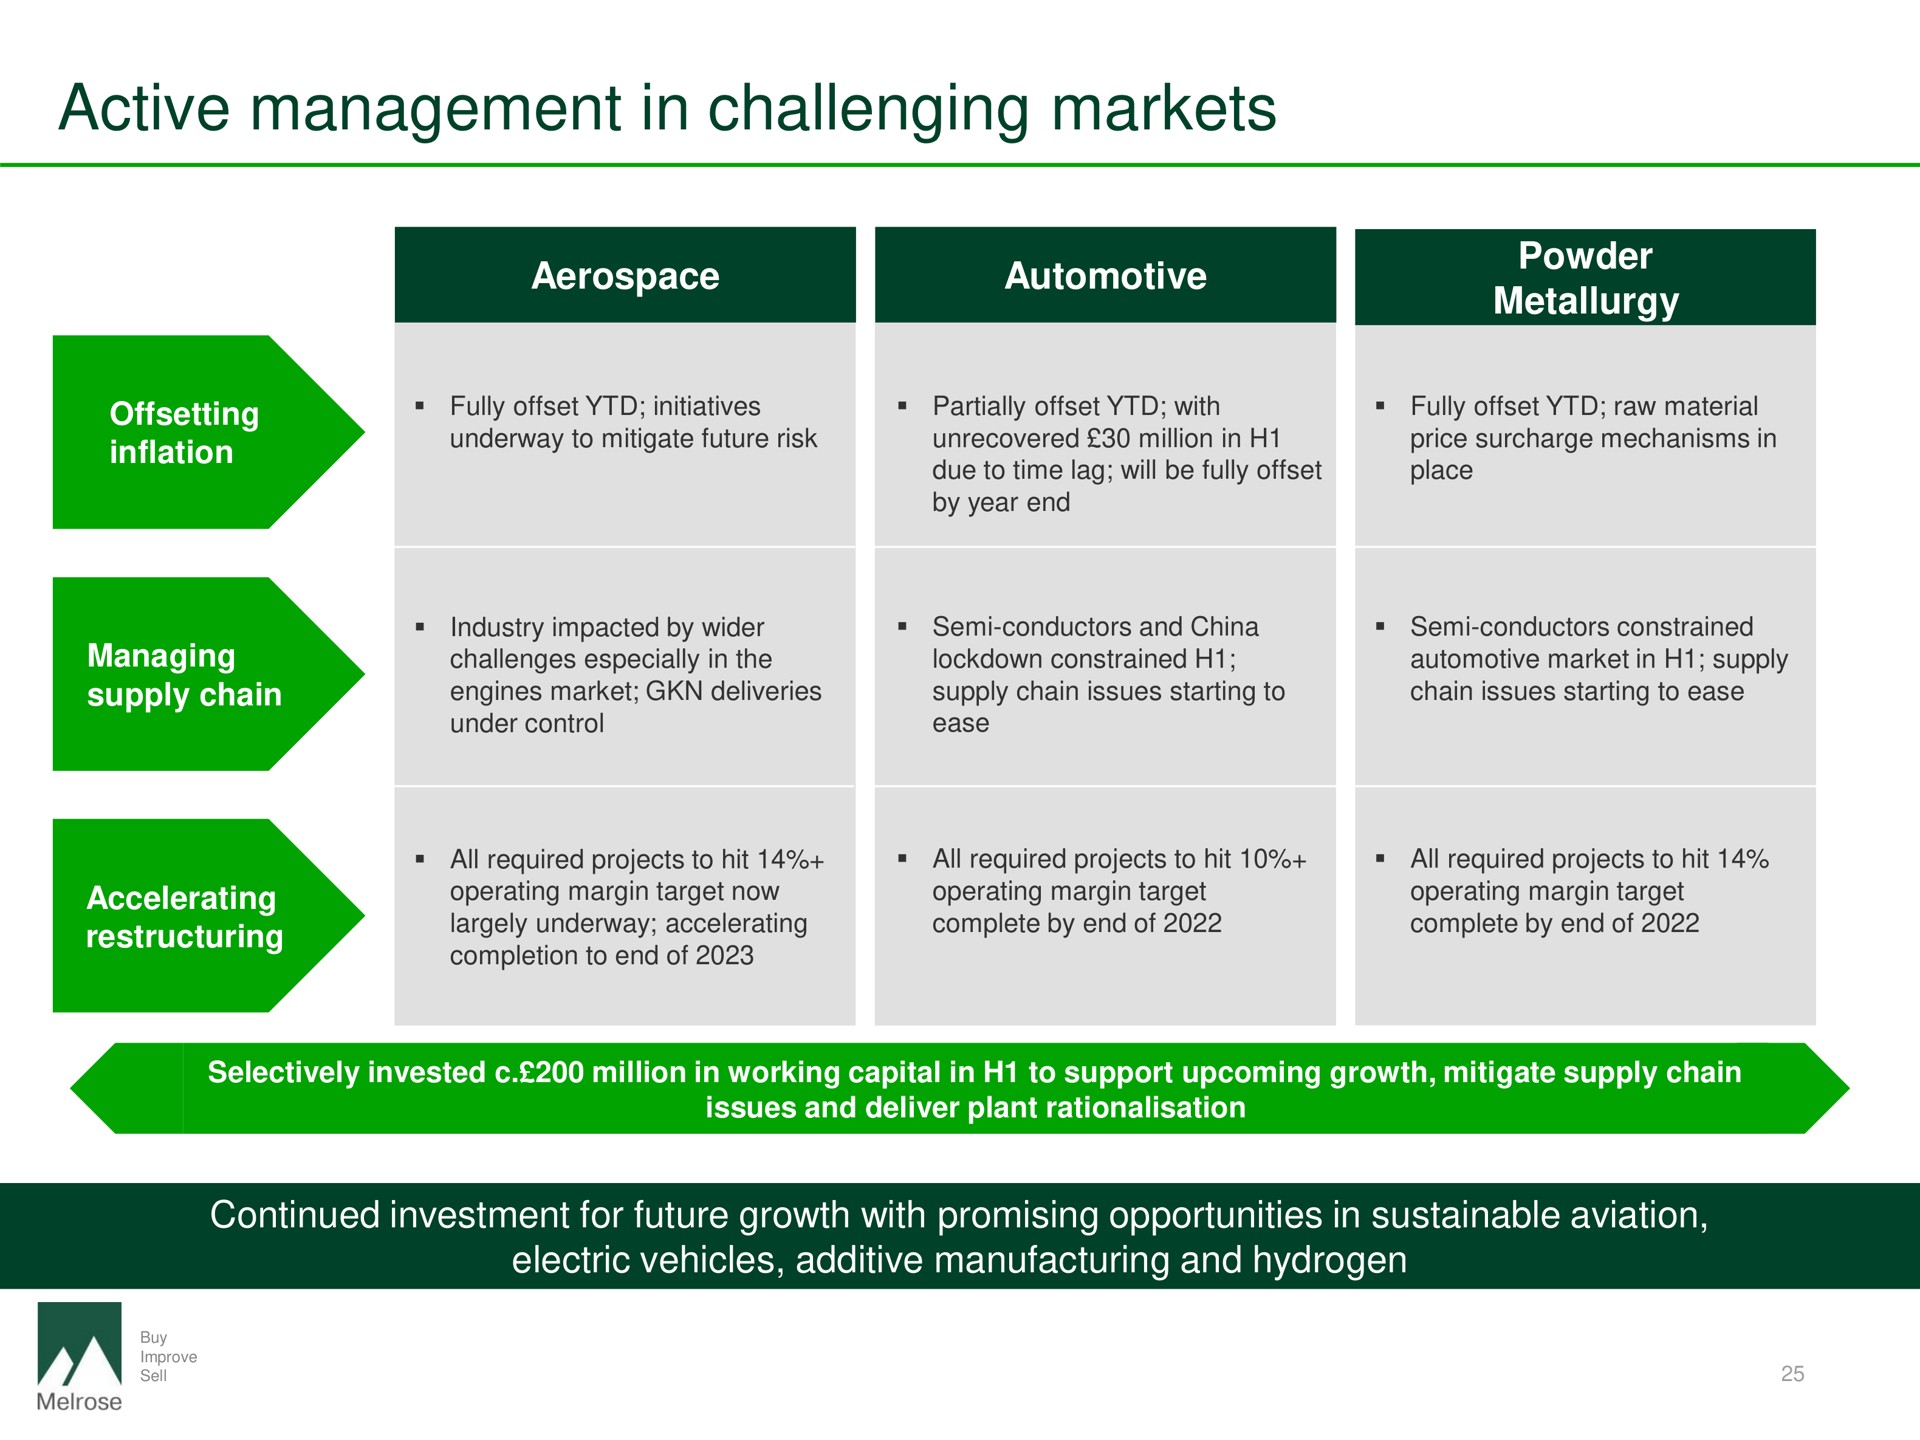 active management in challenging markets automotive powder metallurgy continued investment for future growth with promising opportunities in sustainable aviation electric vehicles additive manufacturing and hydrogen | Melrose